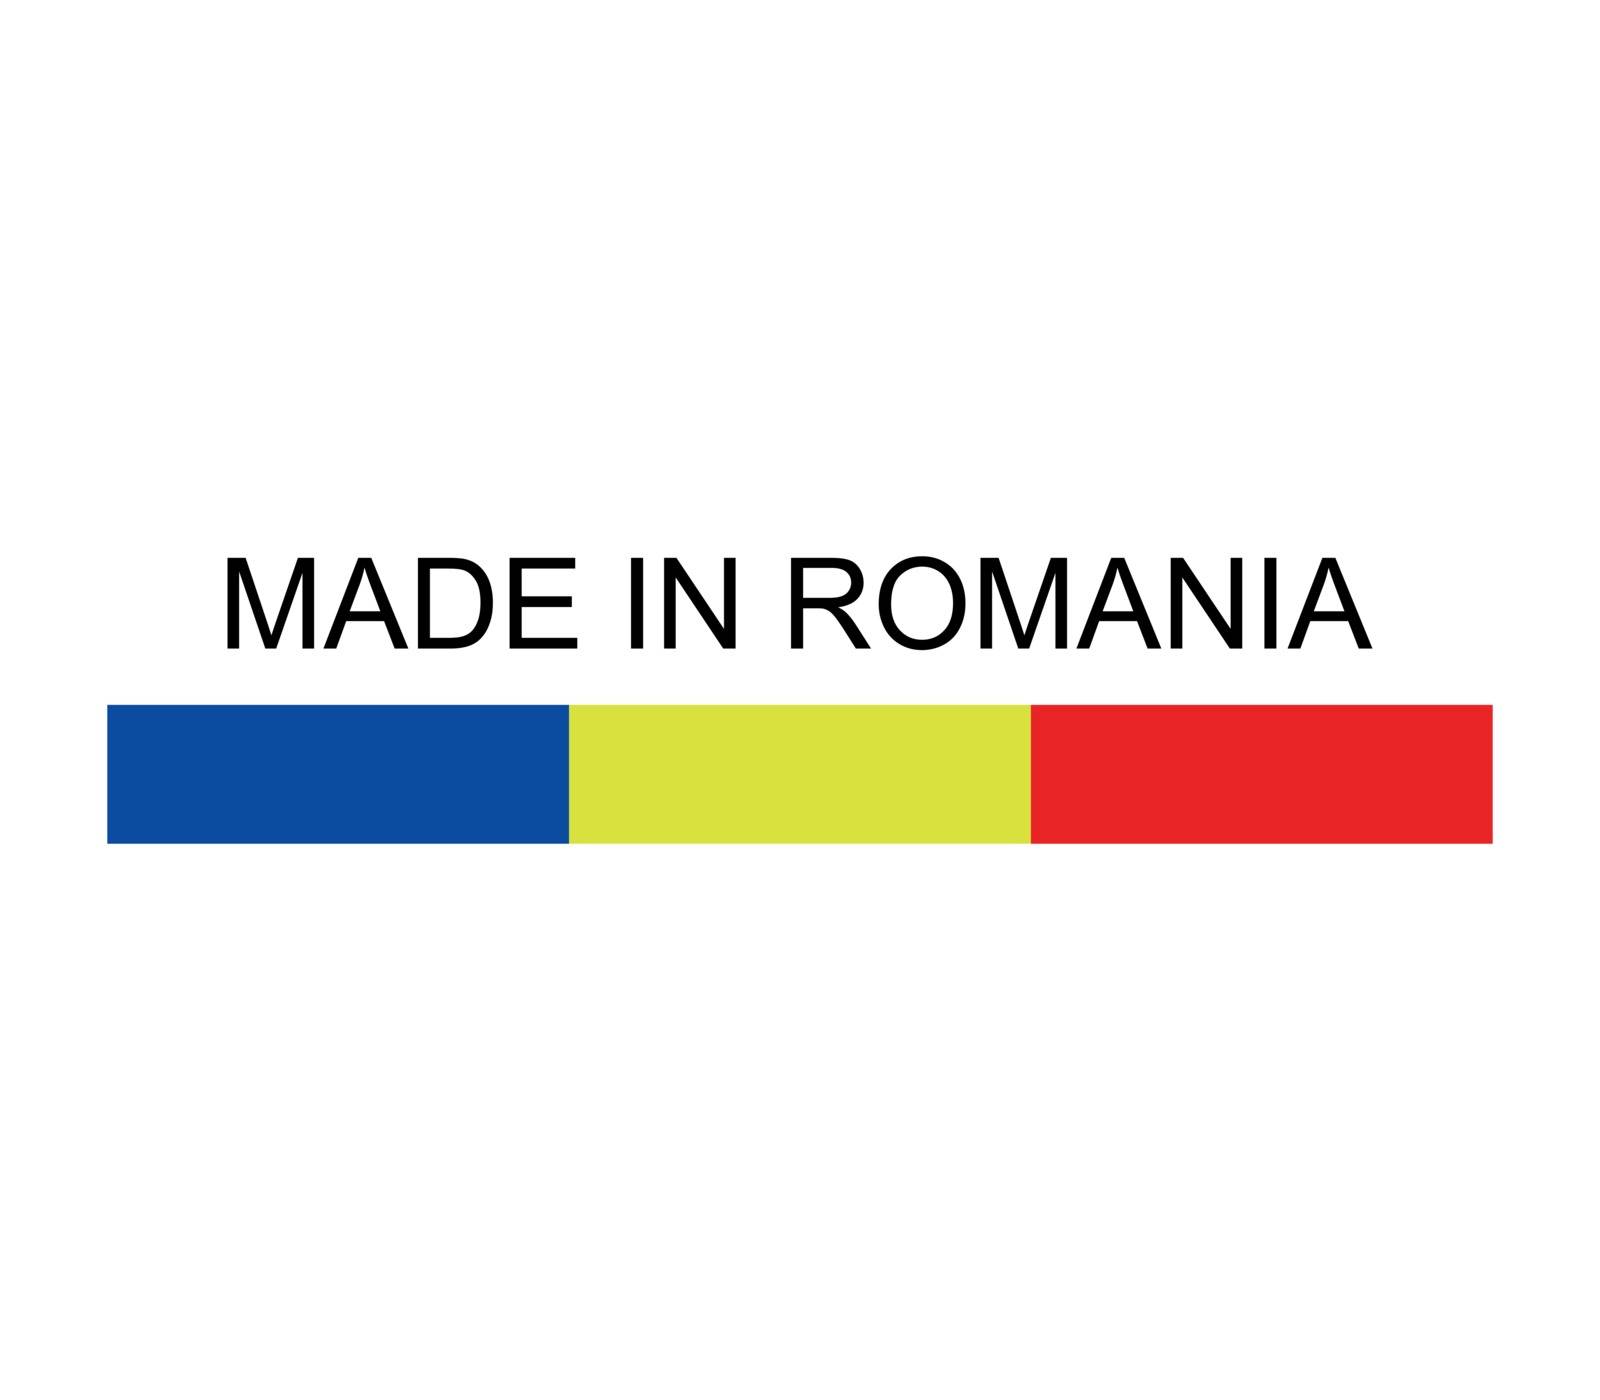 made in romania by Mark1987